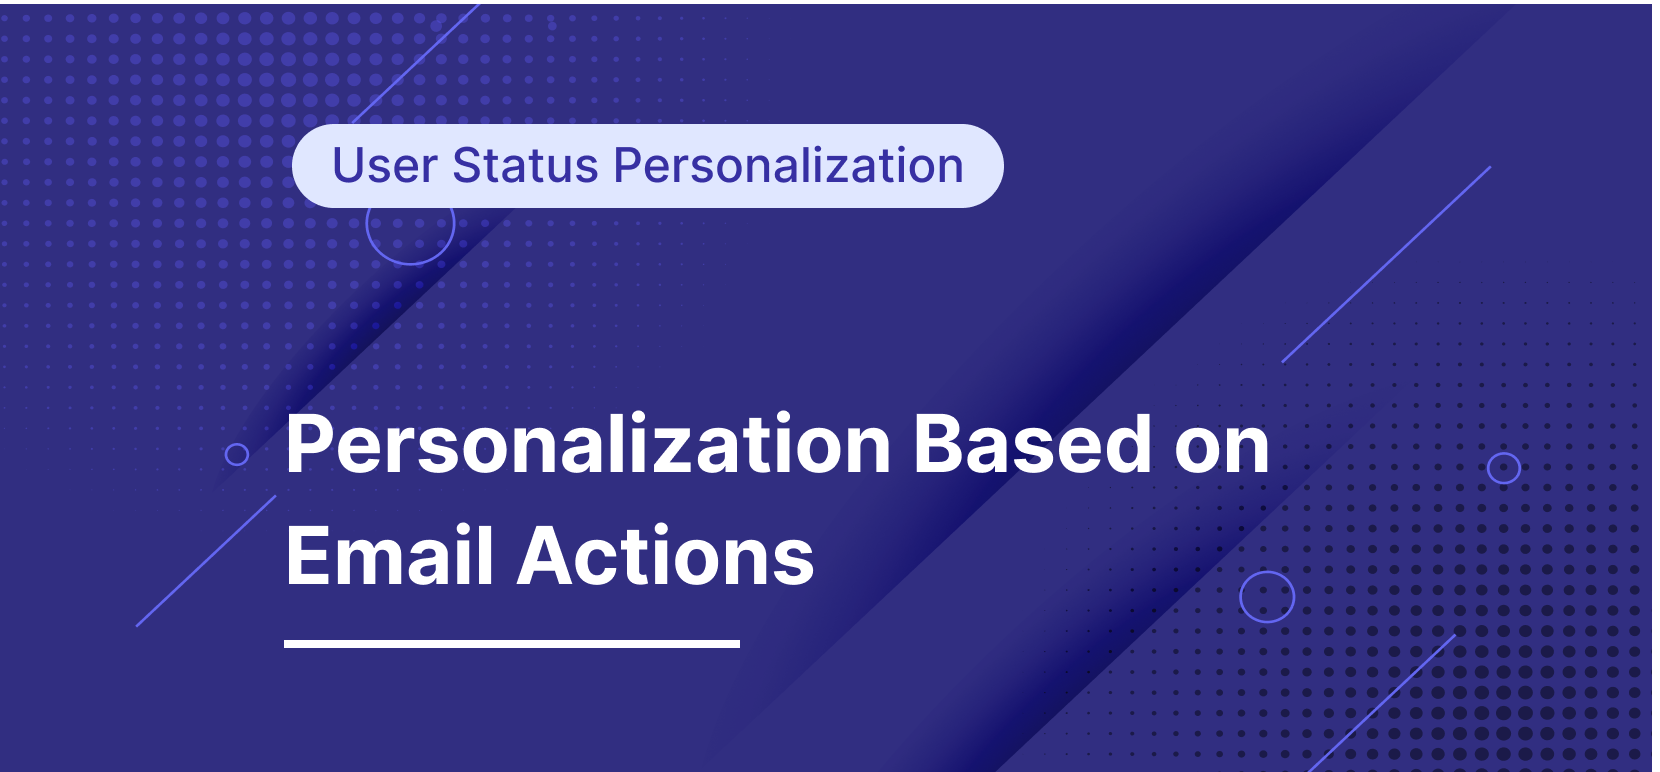 How to Personalize Digital Experience Based on Different Email Actions